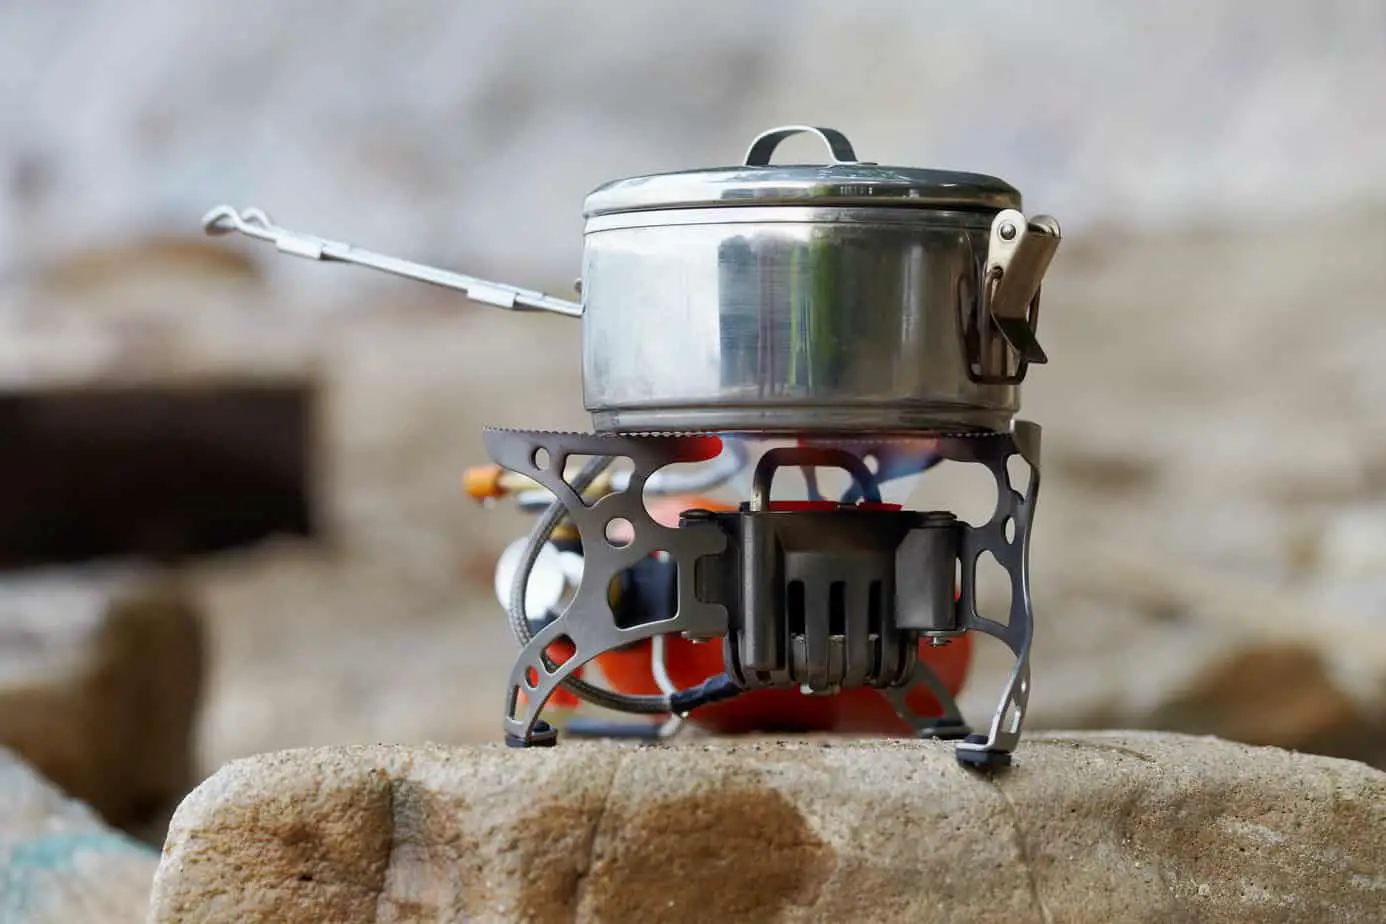 backpacking stove